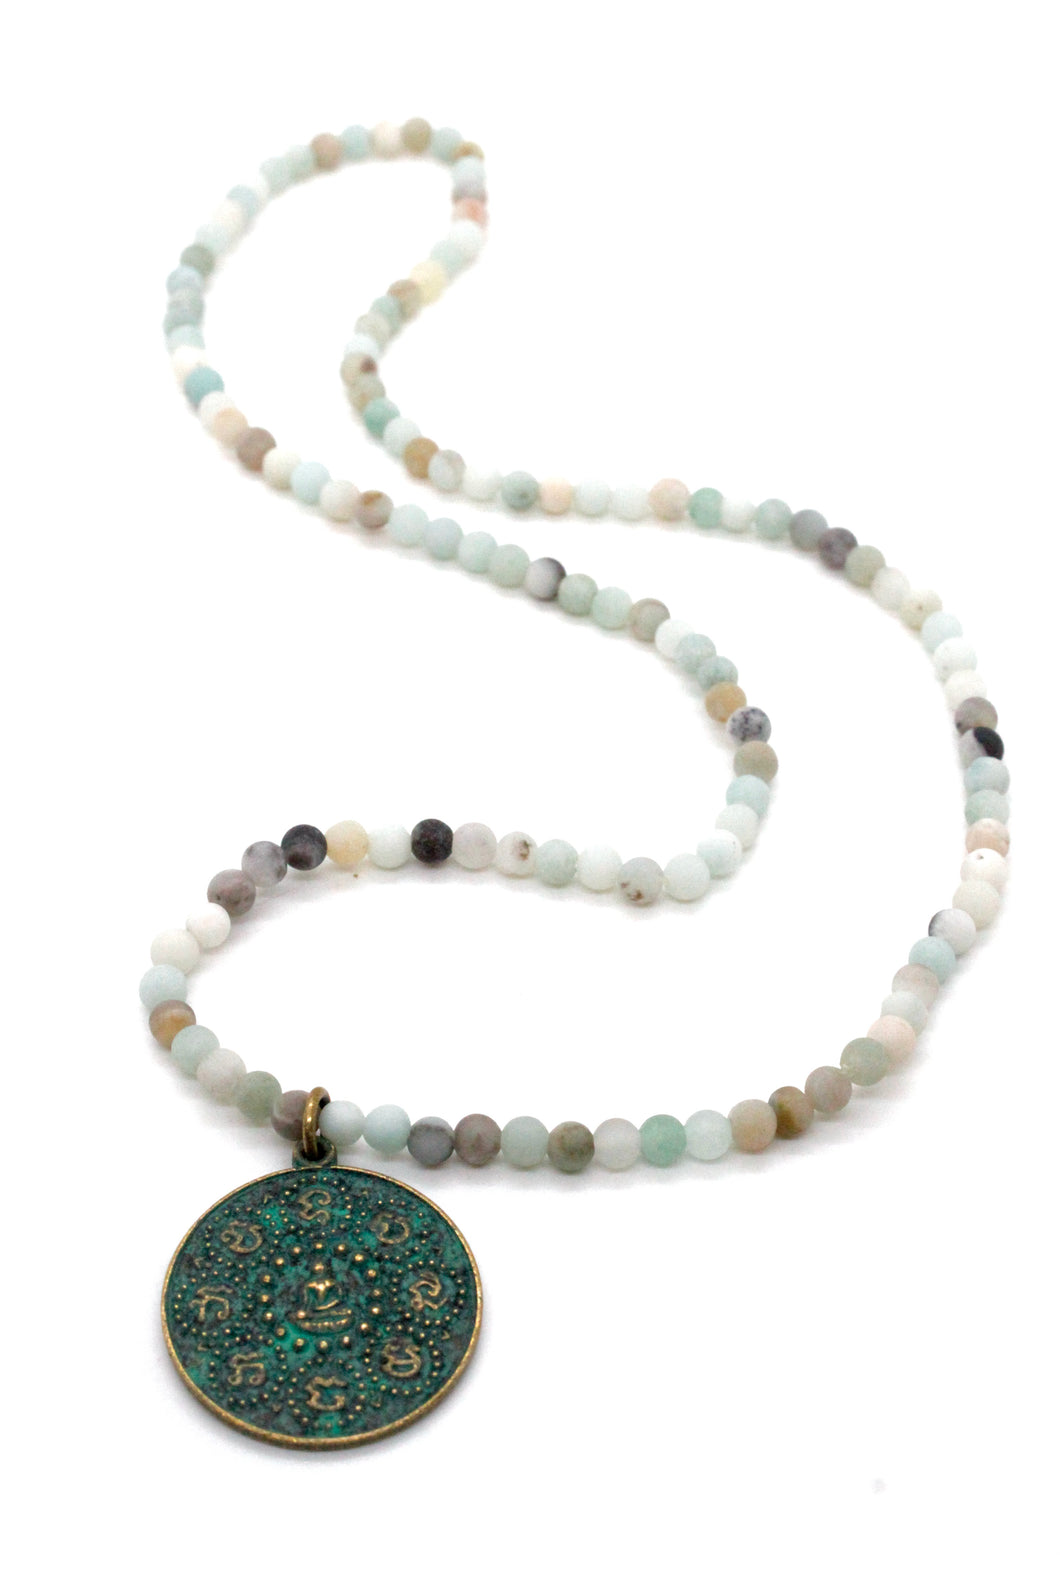 Stretch Amazonite Necklace or Bracelet with Buddha Disc Charm NS-AZ-GrB2 -The Buddha Collection-